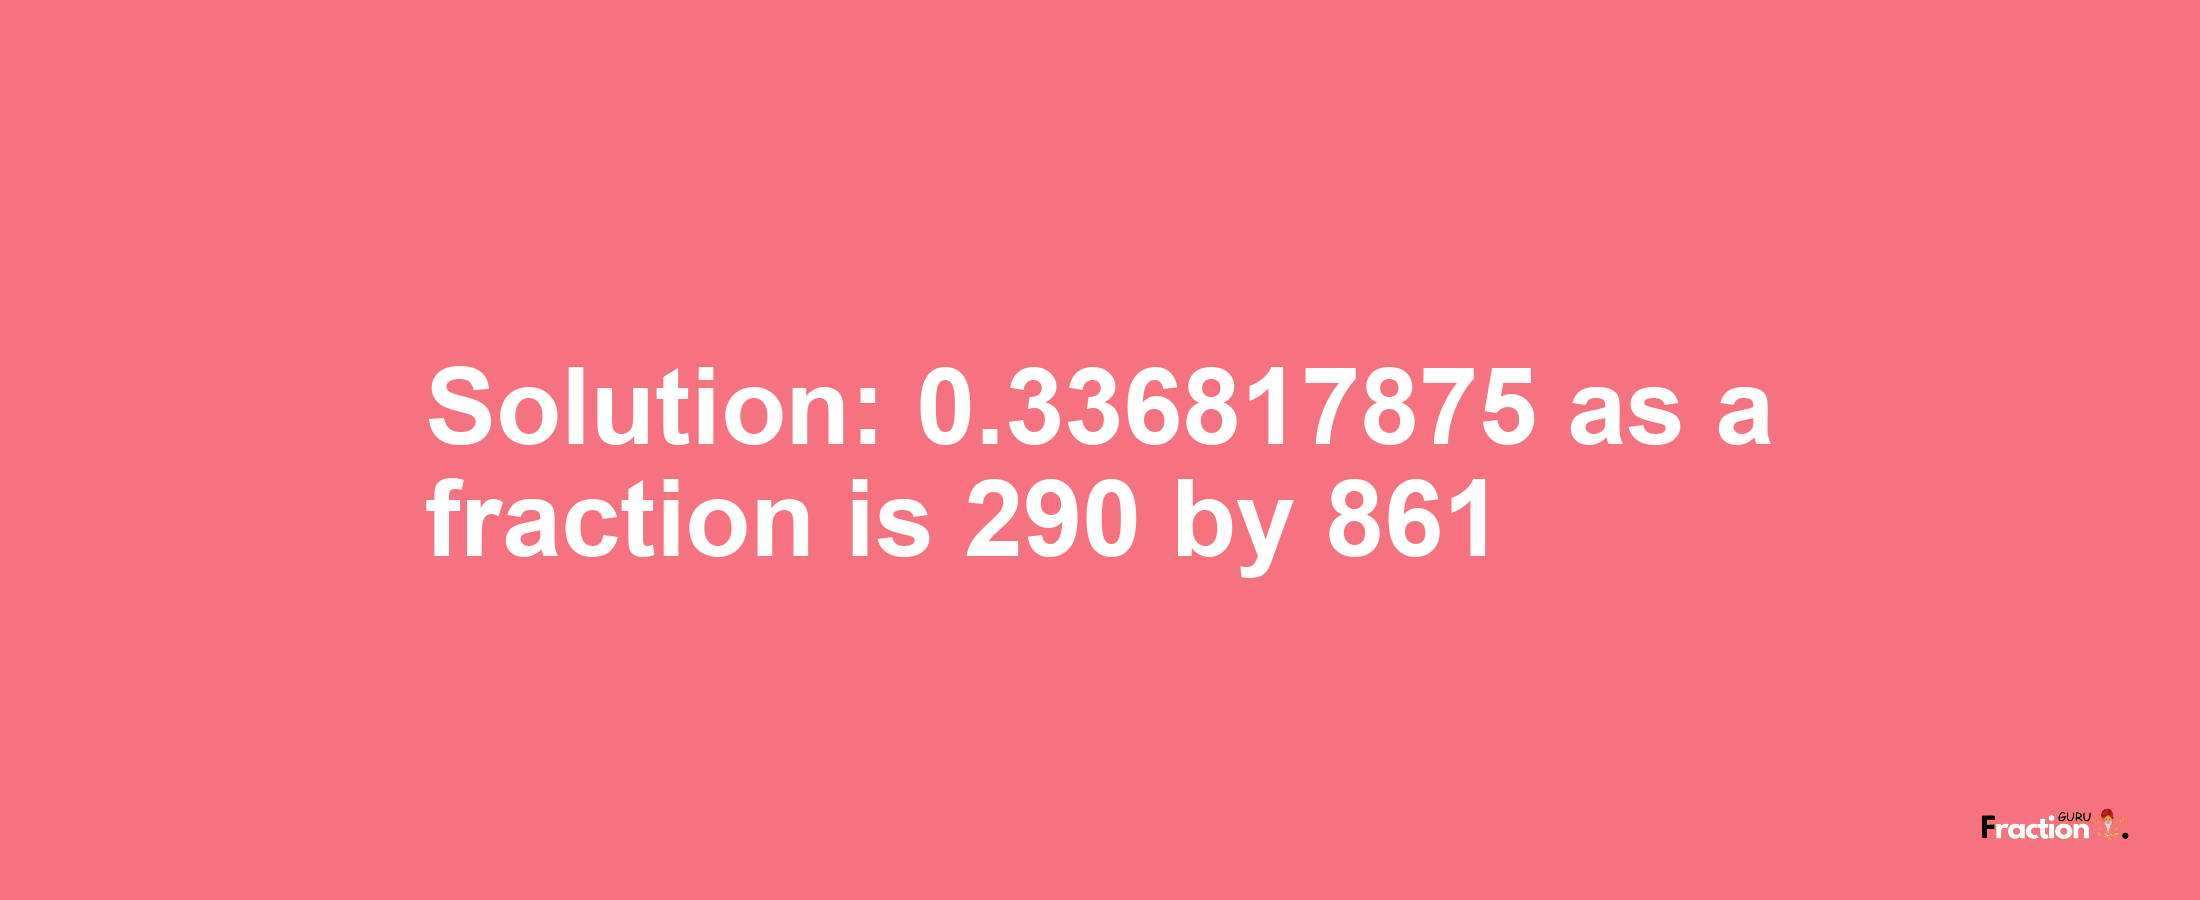 Solution:0.336817875 as a fraction is 290/861